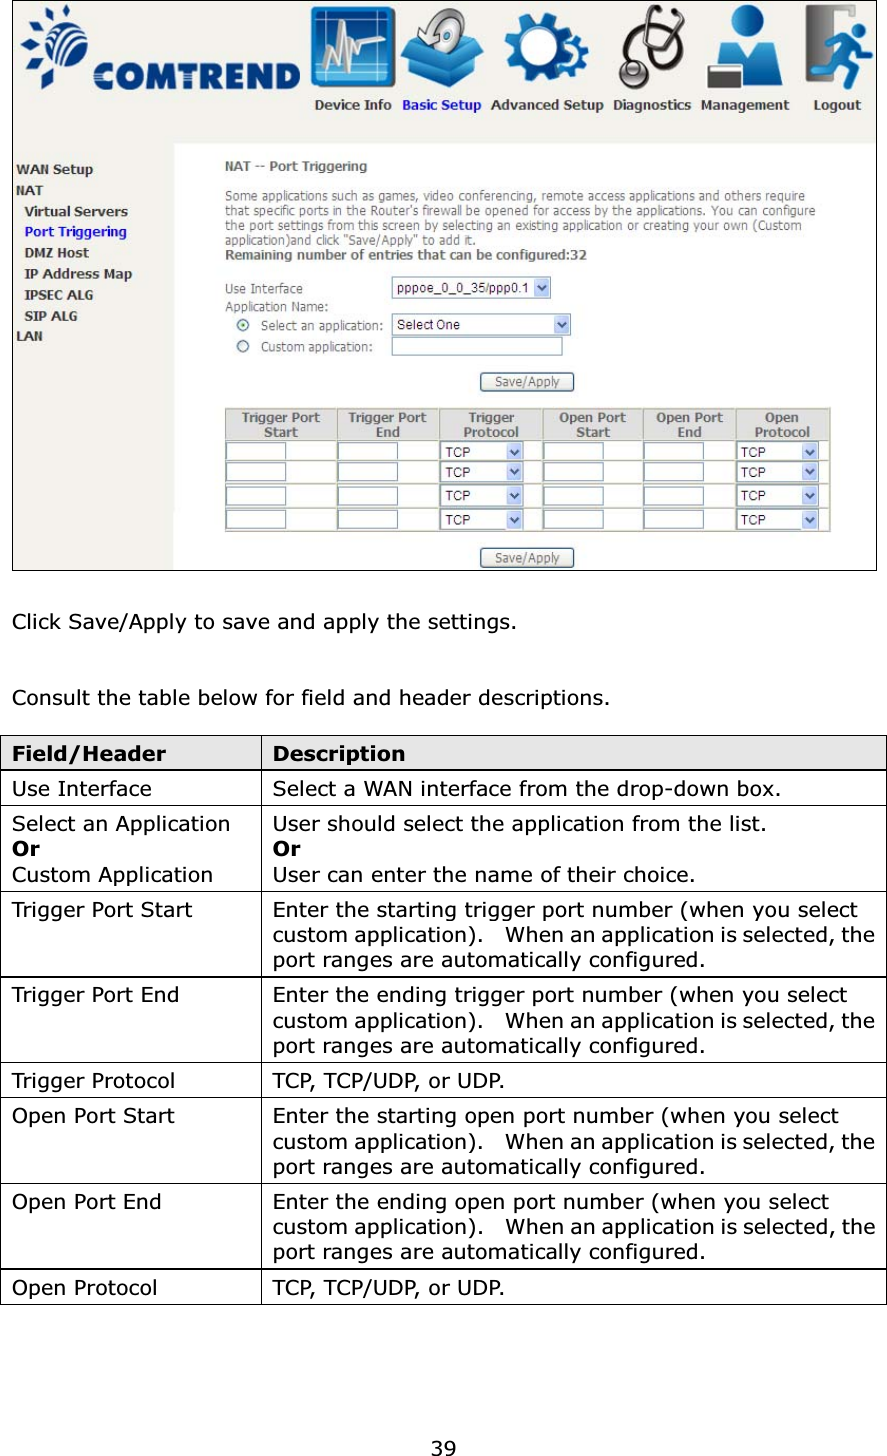 39Click Save/Apply to save and apply the settings.Consult the table below for field and header descriptions.Field/Header DescriptionUse Interface Select a WAN interface from the drop-down box.Select an ApplicationOrCustom ApplicationUser should select the application from the list.OrUser can enter the name of their choice.Trigger Port Start Enter the starting trigger port number (when you select custom application).    When an application is selected, the port ranges are automatically configured.Trigger Port End Enter the ending trigger port number (when you select custom application).    When an application is selected, the port ranges are automatically configured.Trigger Protocol TC P,  T C P / U D P,  o r  U D P.Open Port Start Enter the starting open port number (when you select custom application).    When an application is selected, the port ranges are automatically configured.Open Port End Enter the ending open port number (when you select custom application).    When an application is selected, theport ranges are automatically configured.Open Protocol TC P,  T C P / U D P,  o r  U D P.